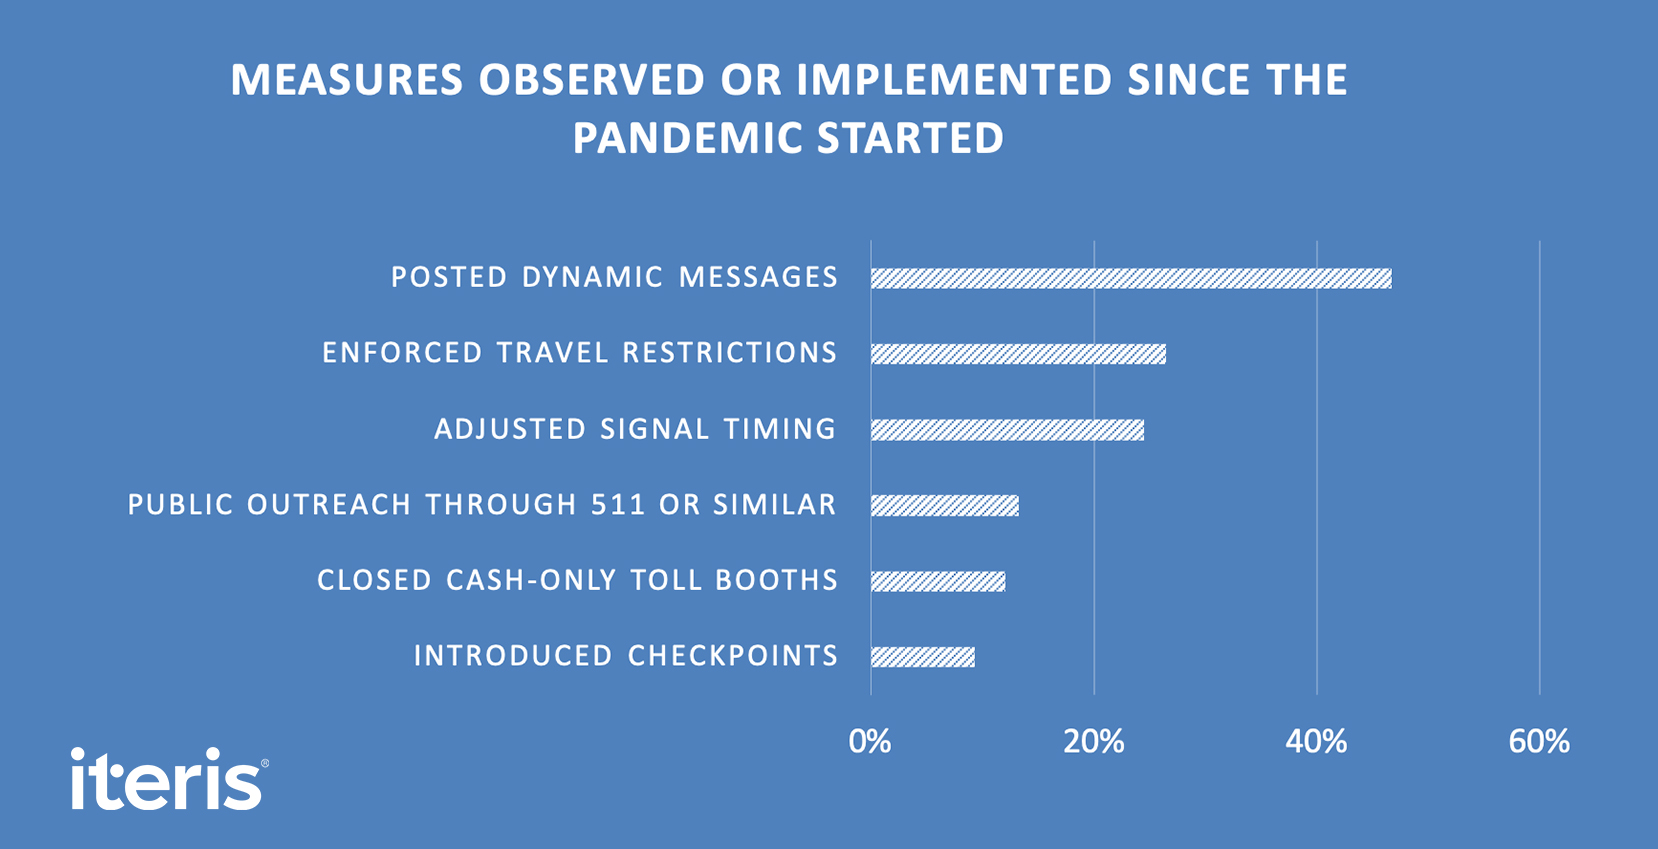 Measures observed or implemented since the pandemic started